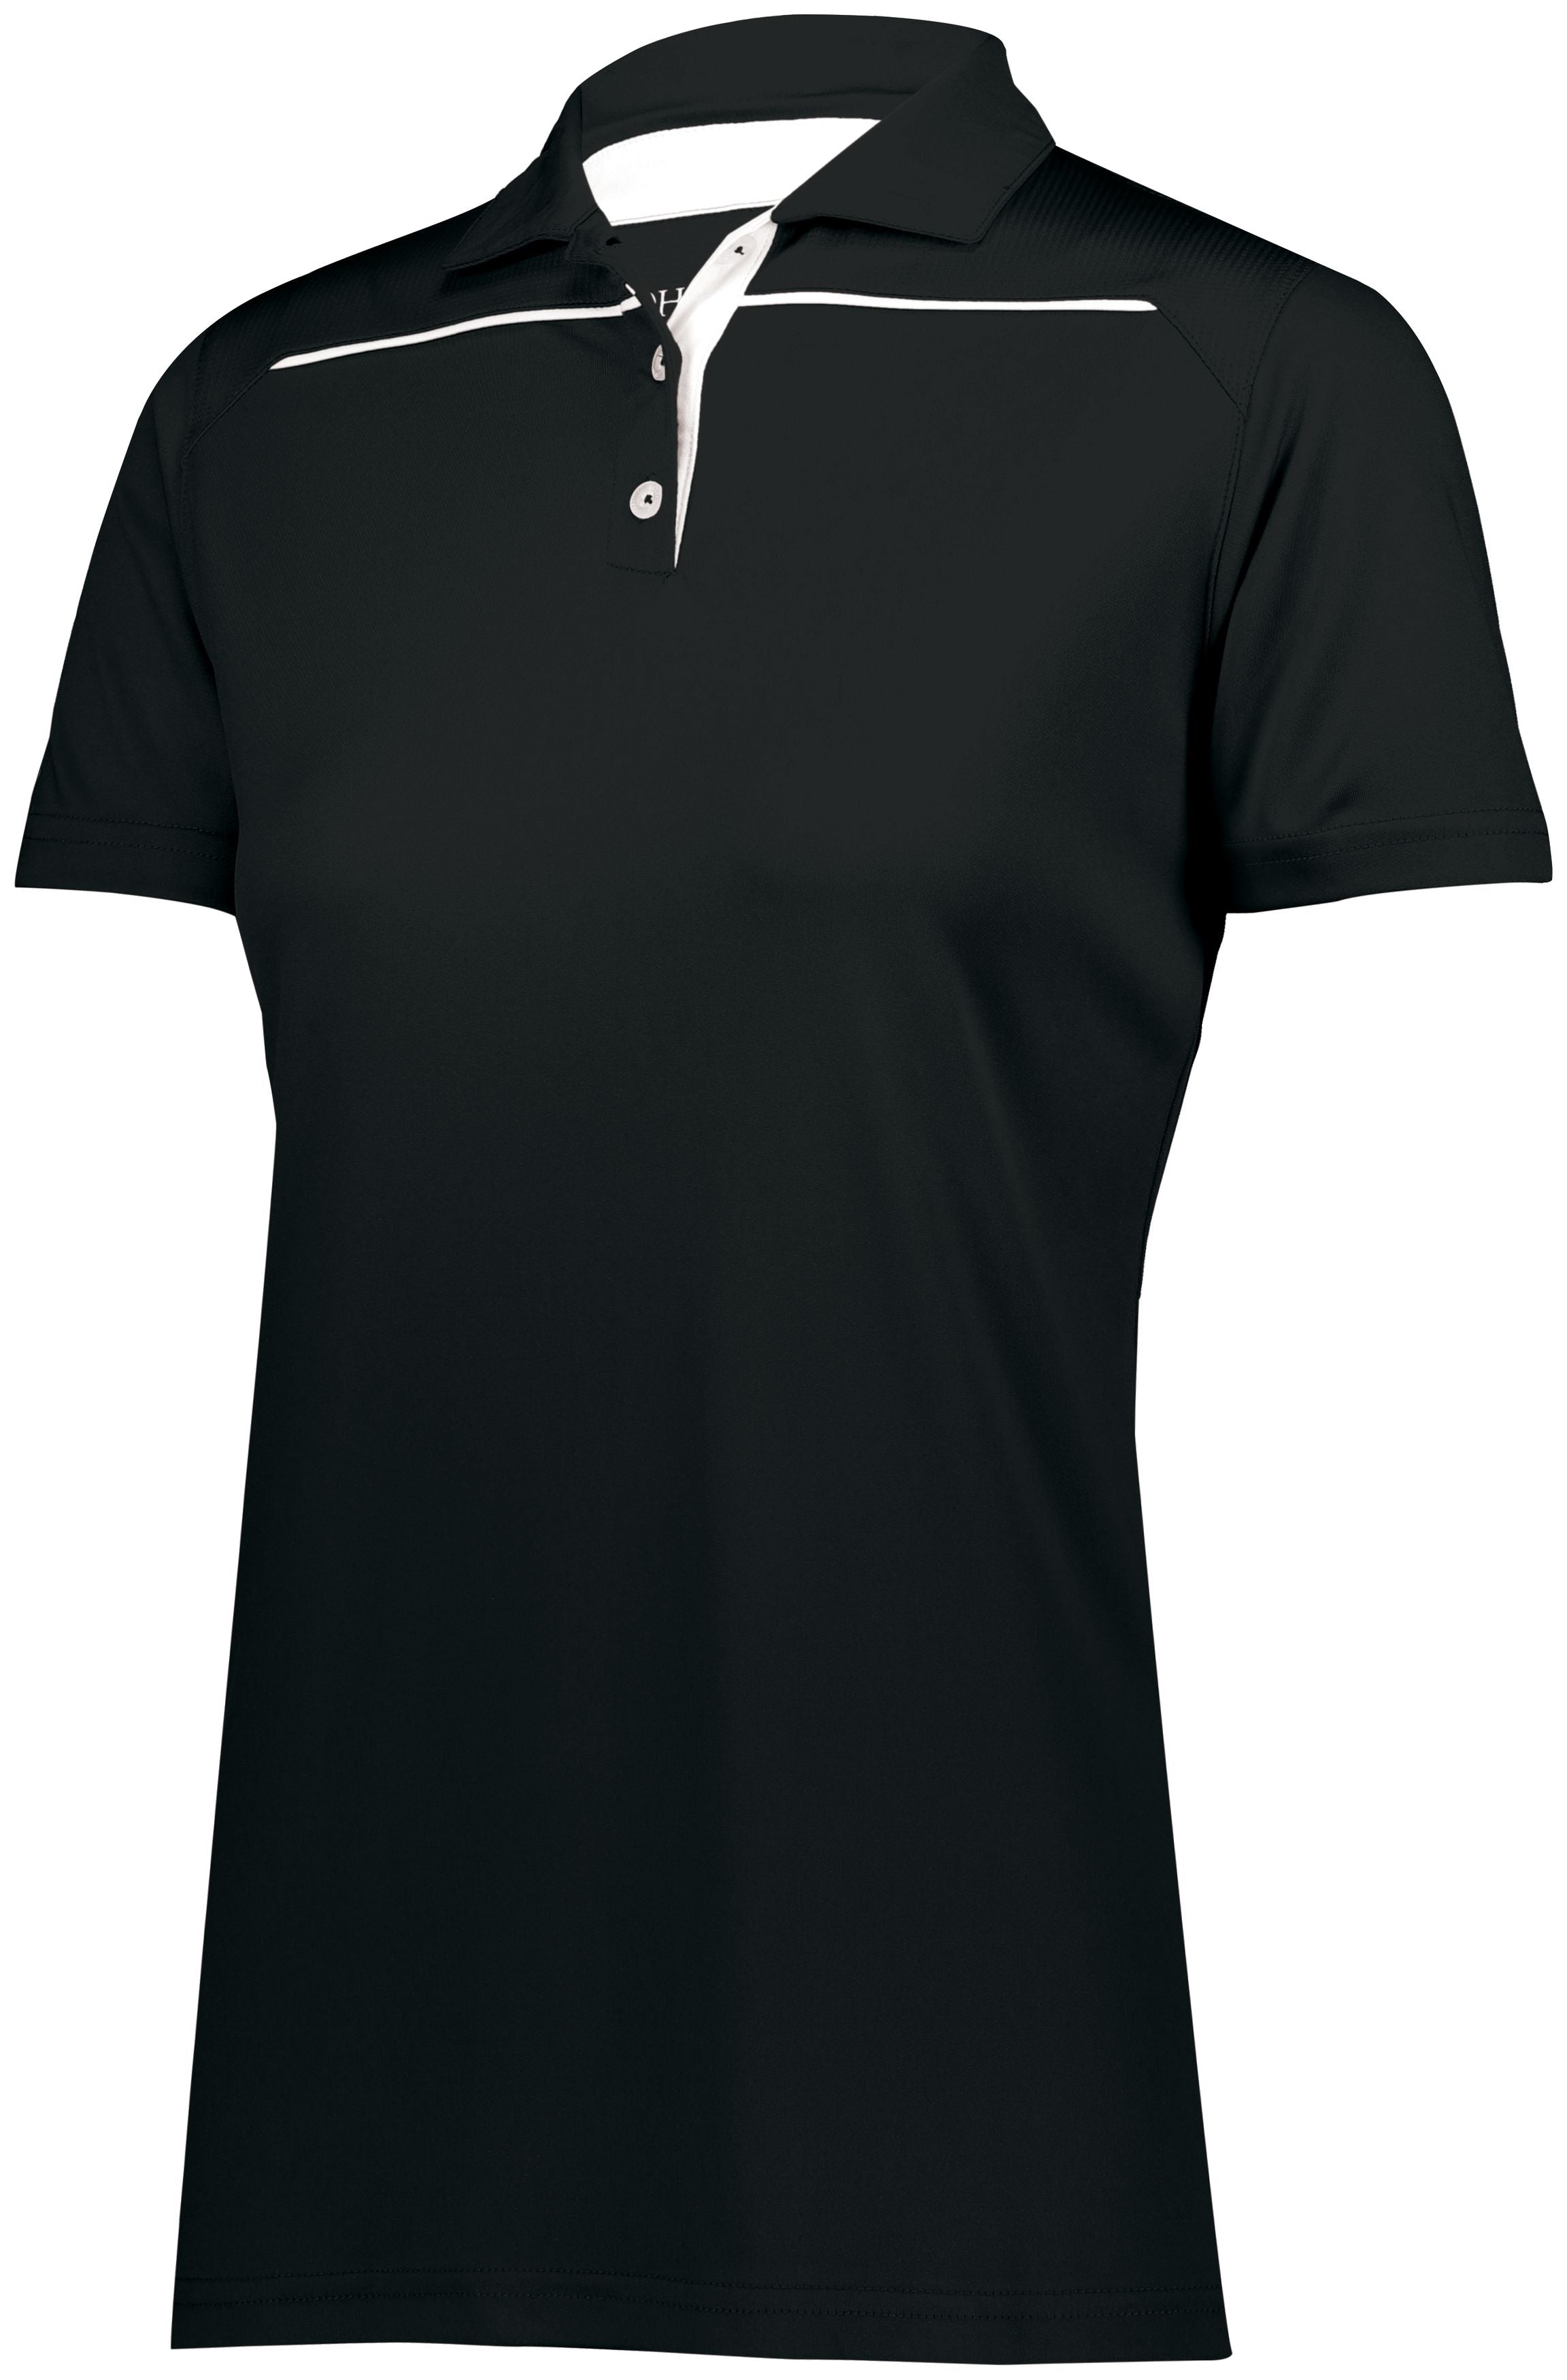 Holloway Ladies Defer Polo in Black/White  -Part of the Ladies, Ladies-Polo, Polos, Holloway, Shirts product lines at KanaleyCreations.com